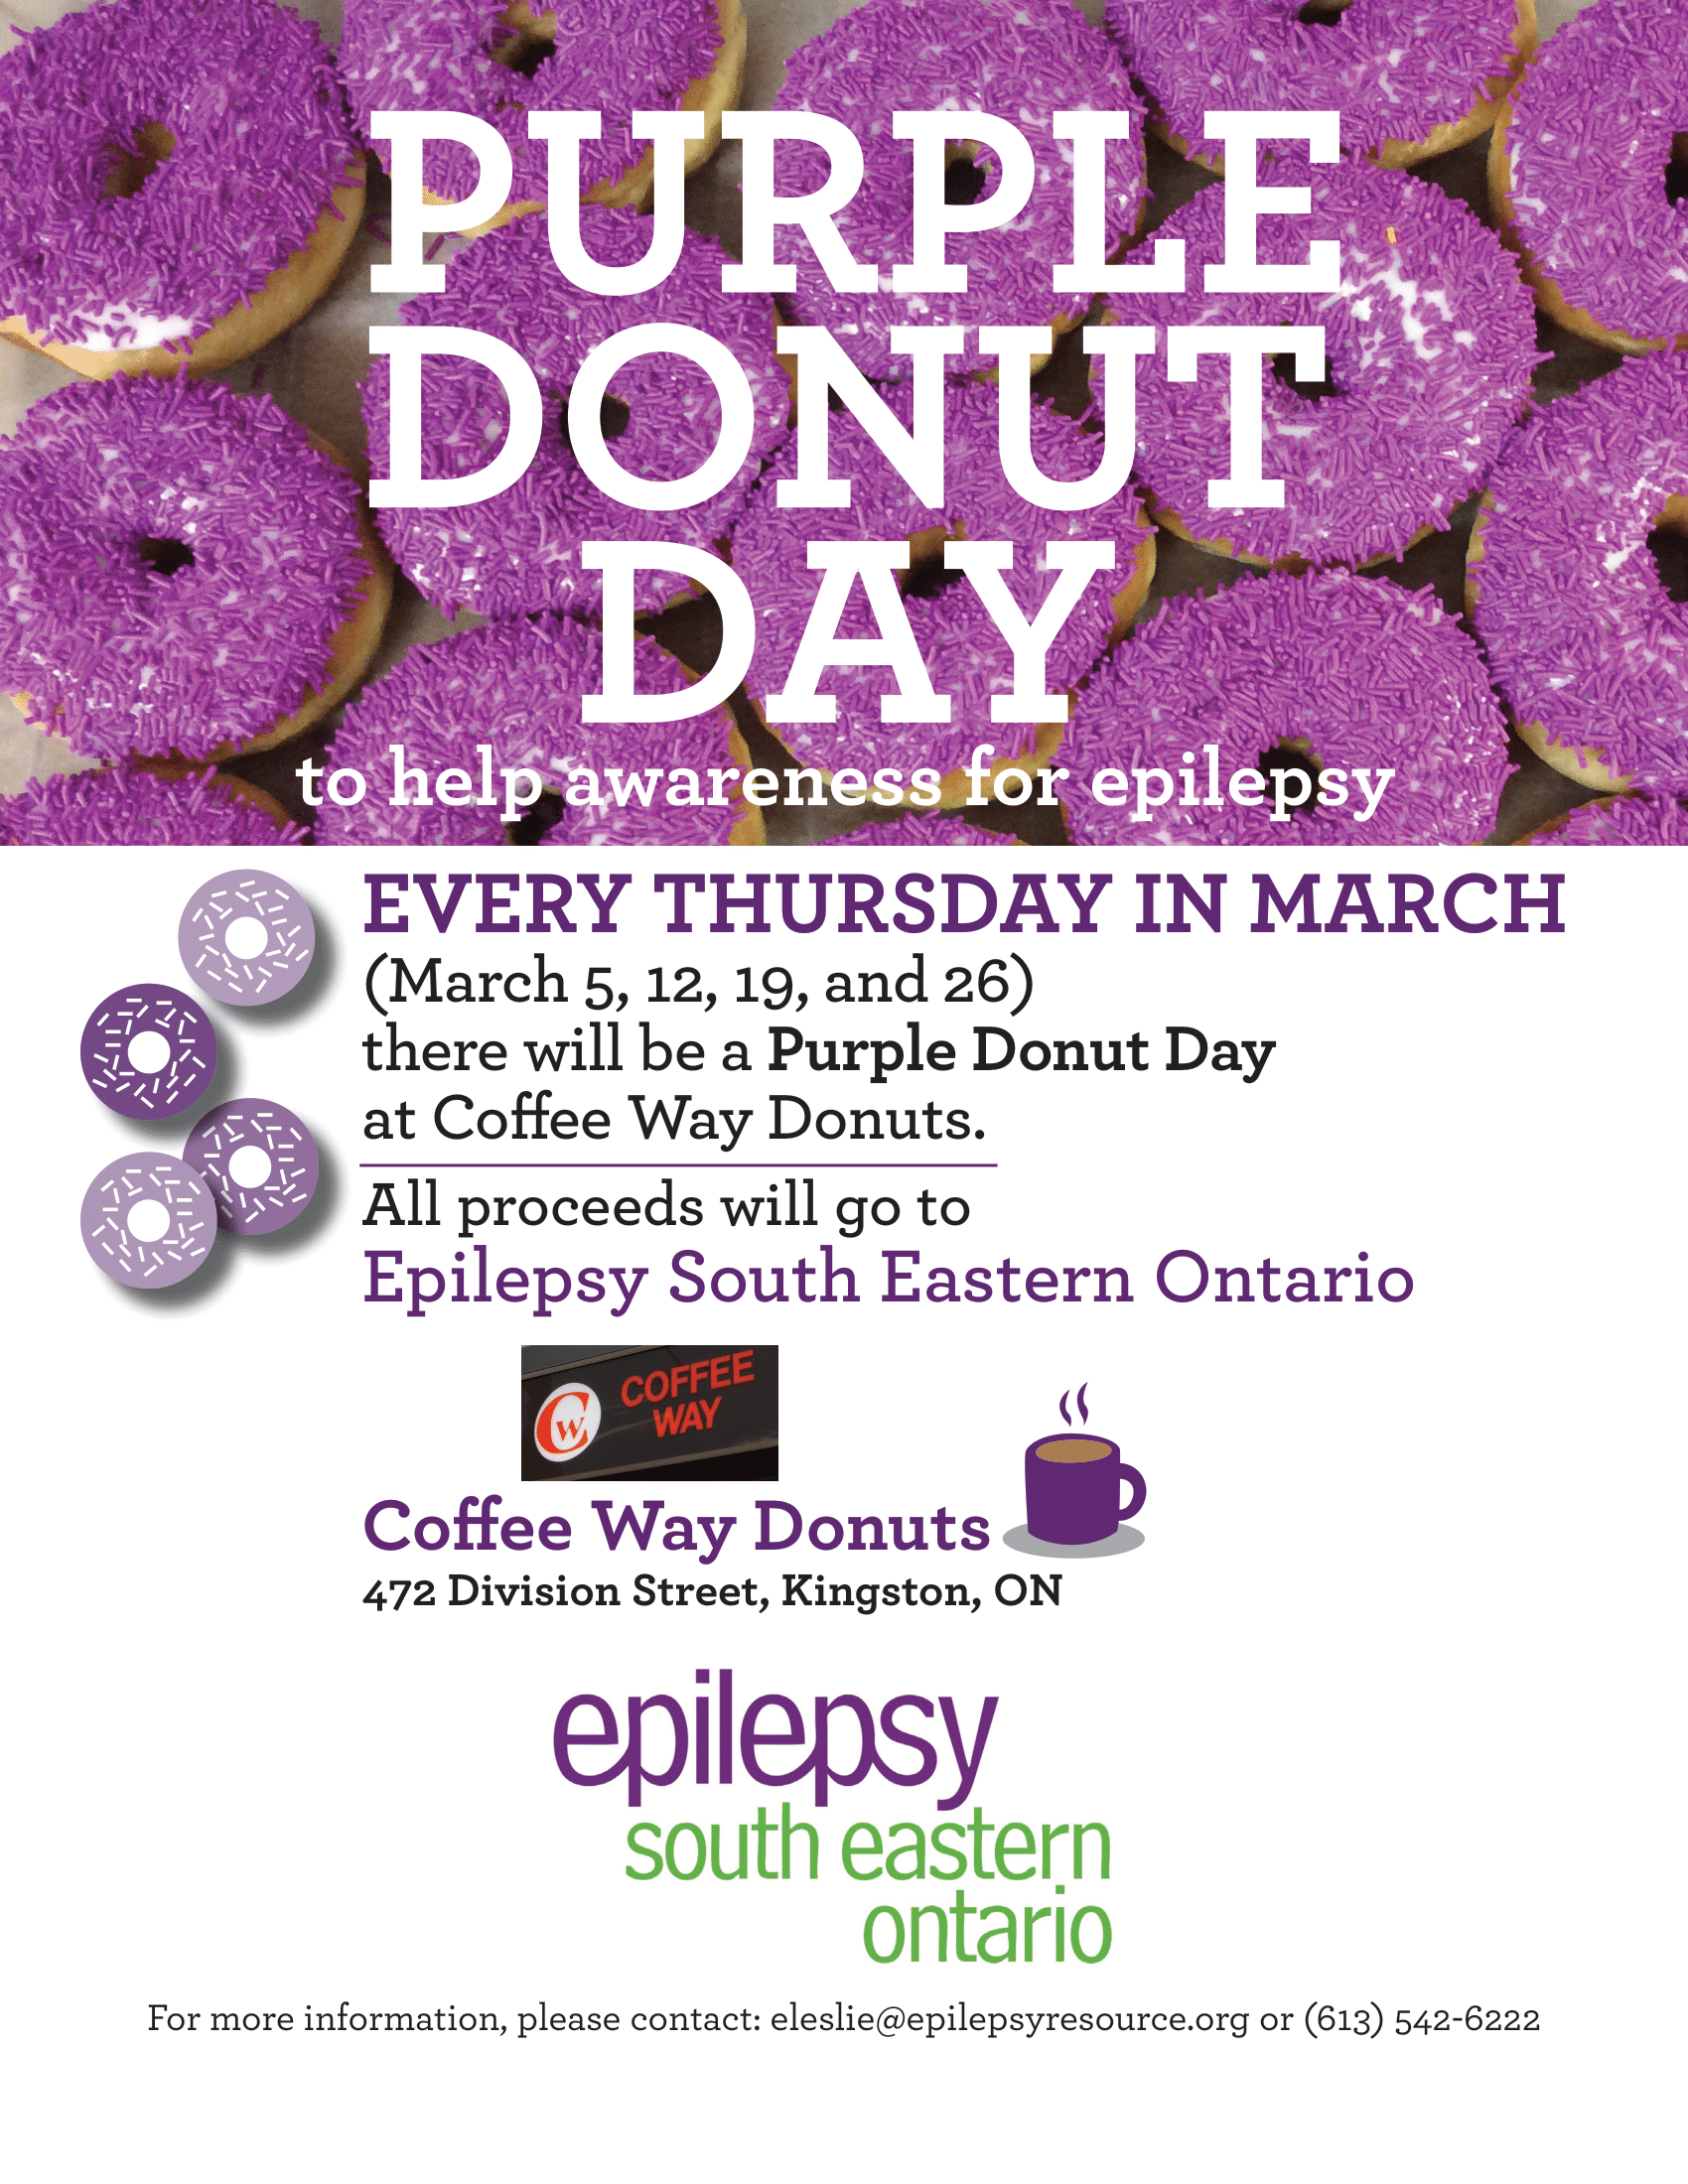 Every Thursday in March is Purple Donut Day at Coffee Way Donuts.